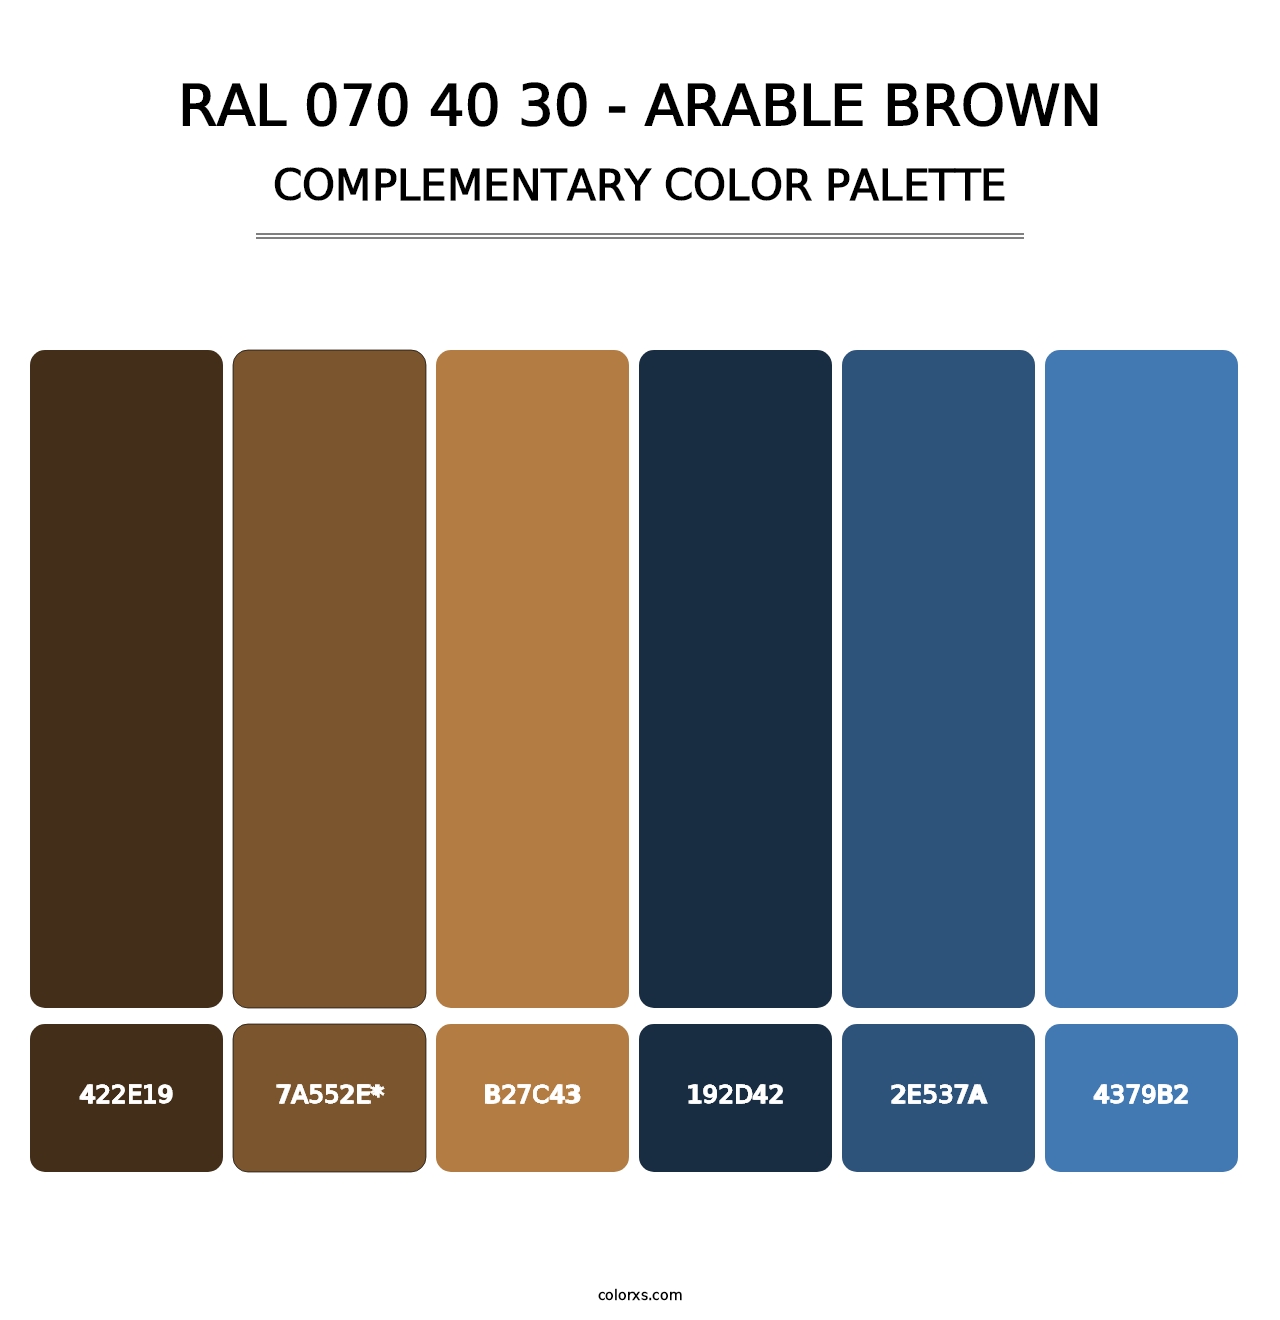 RAL 070 40 30 - Arable Brown - Complementary Color Palette